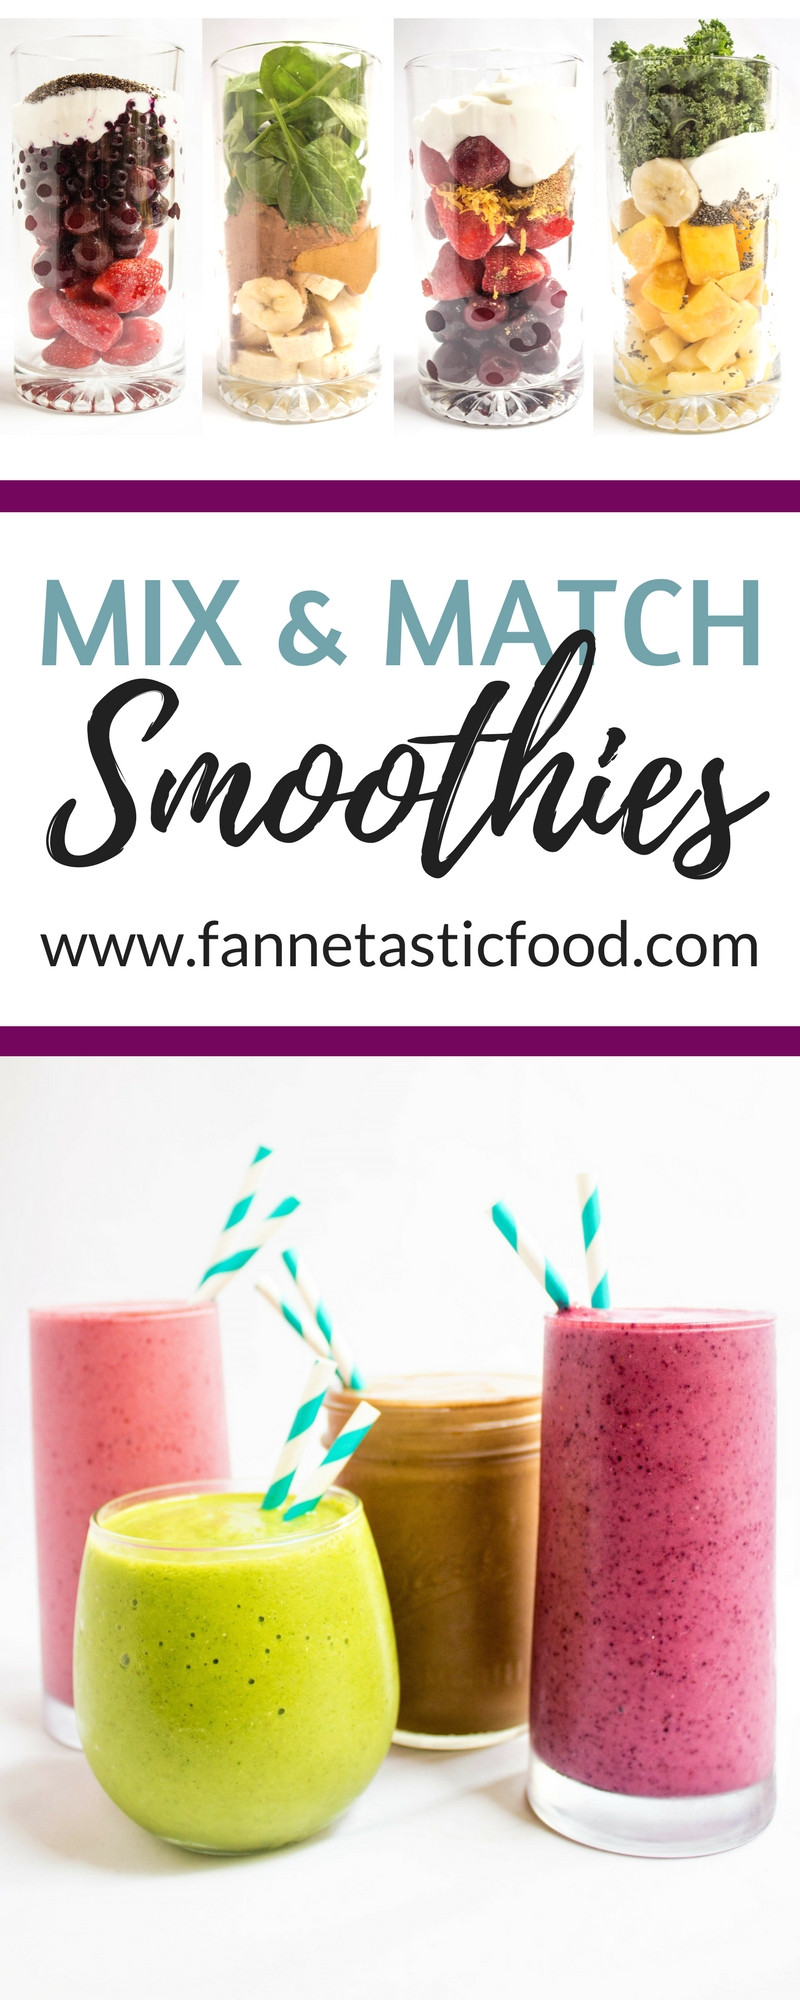 Quick Smoothie Recipes
 Mix & Match Healthy Smoothie Recipes fANNEtastic food